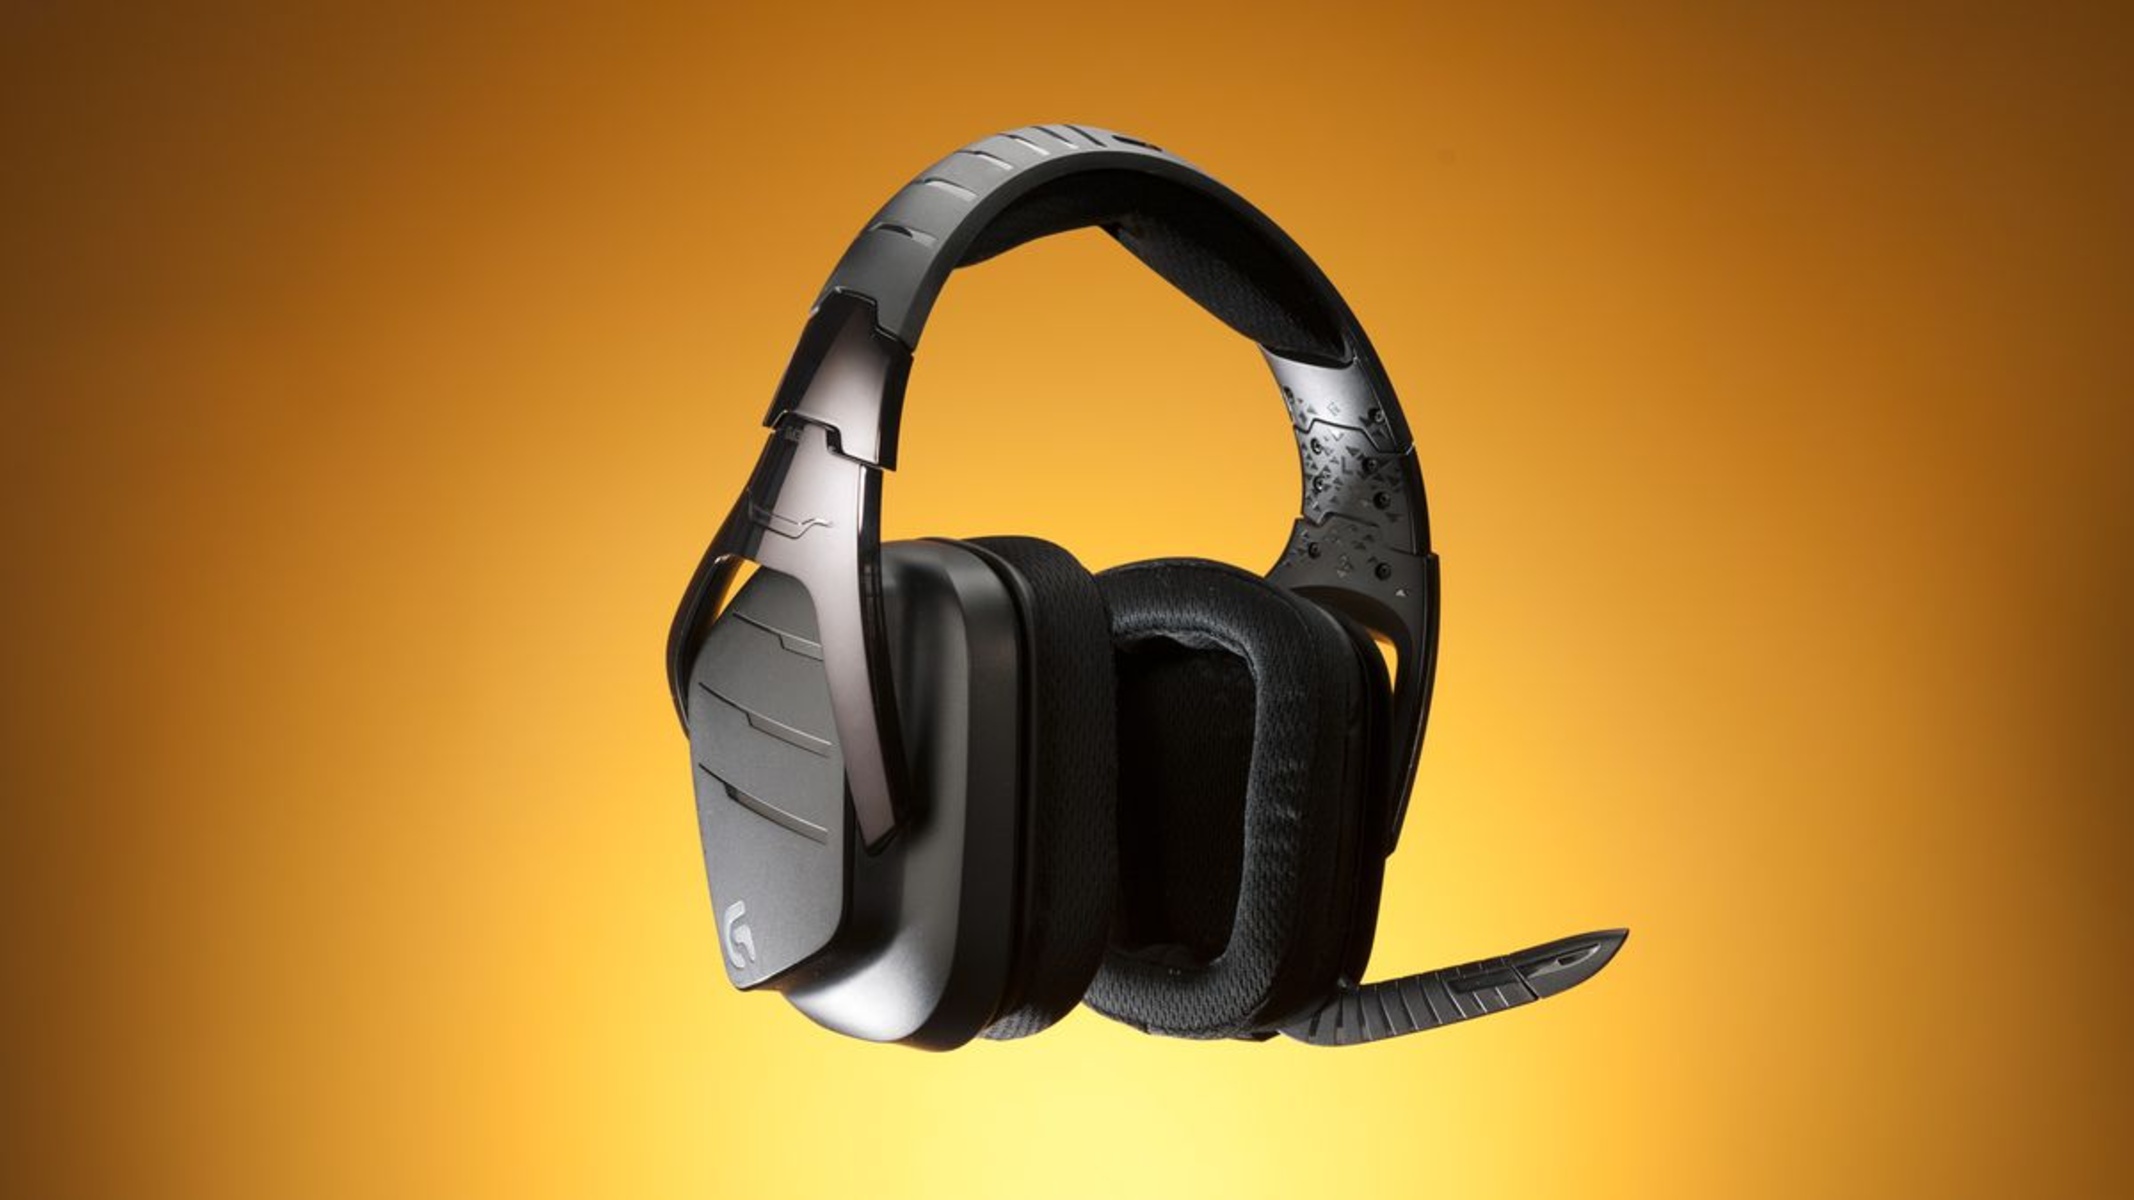 when-g633-artemis-spectrum-gaming-headset-is-set-to-a-96k-sample-rate-in-windows